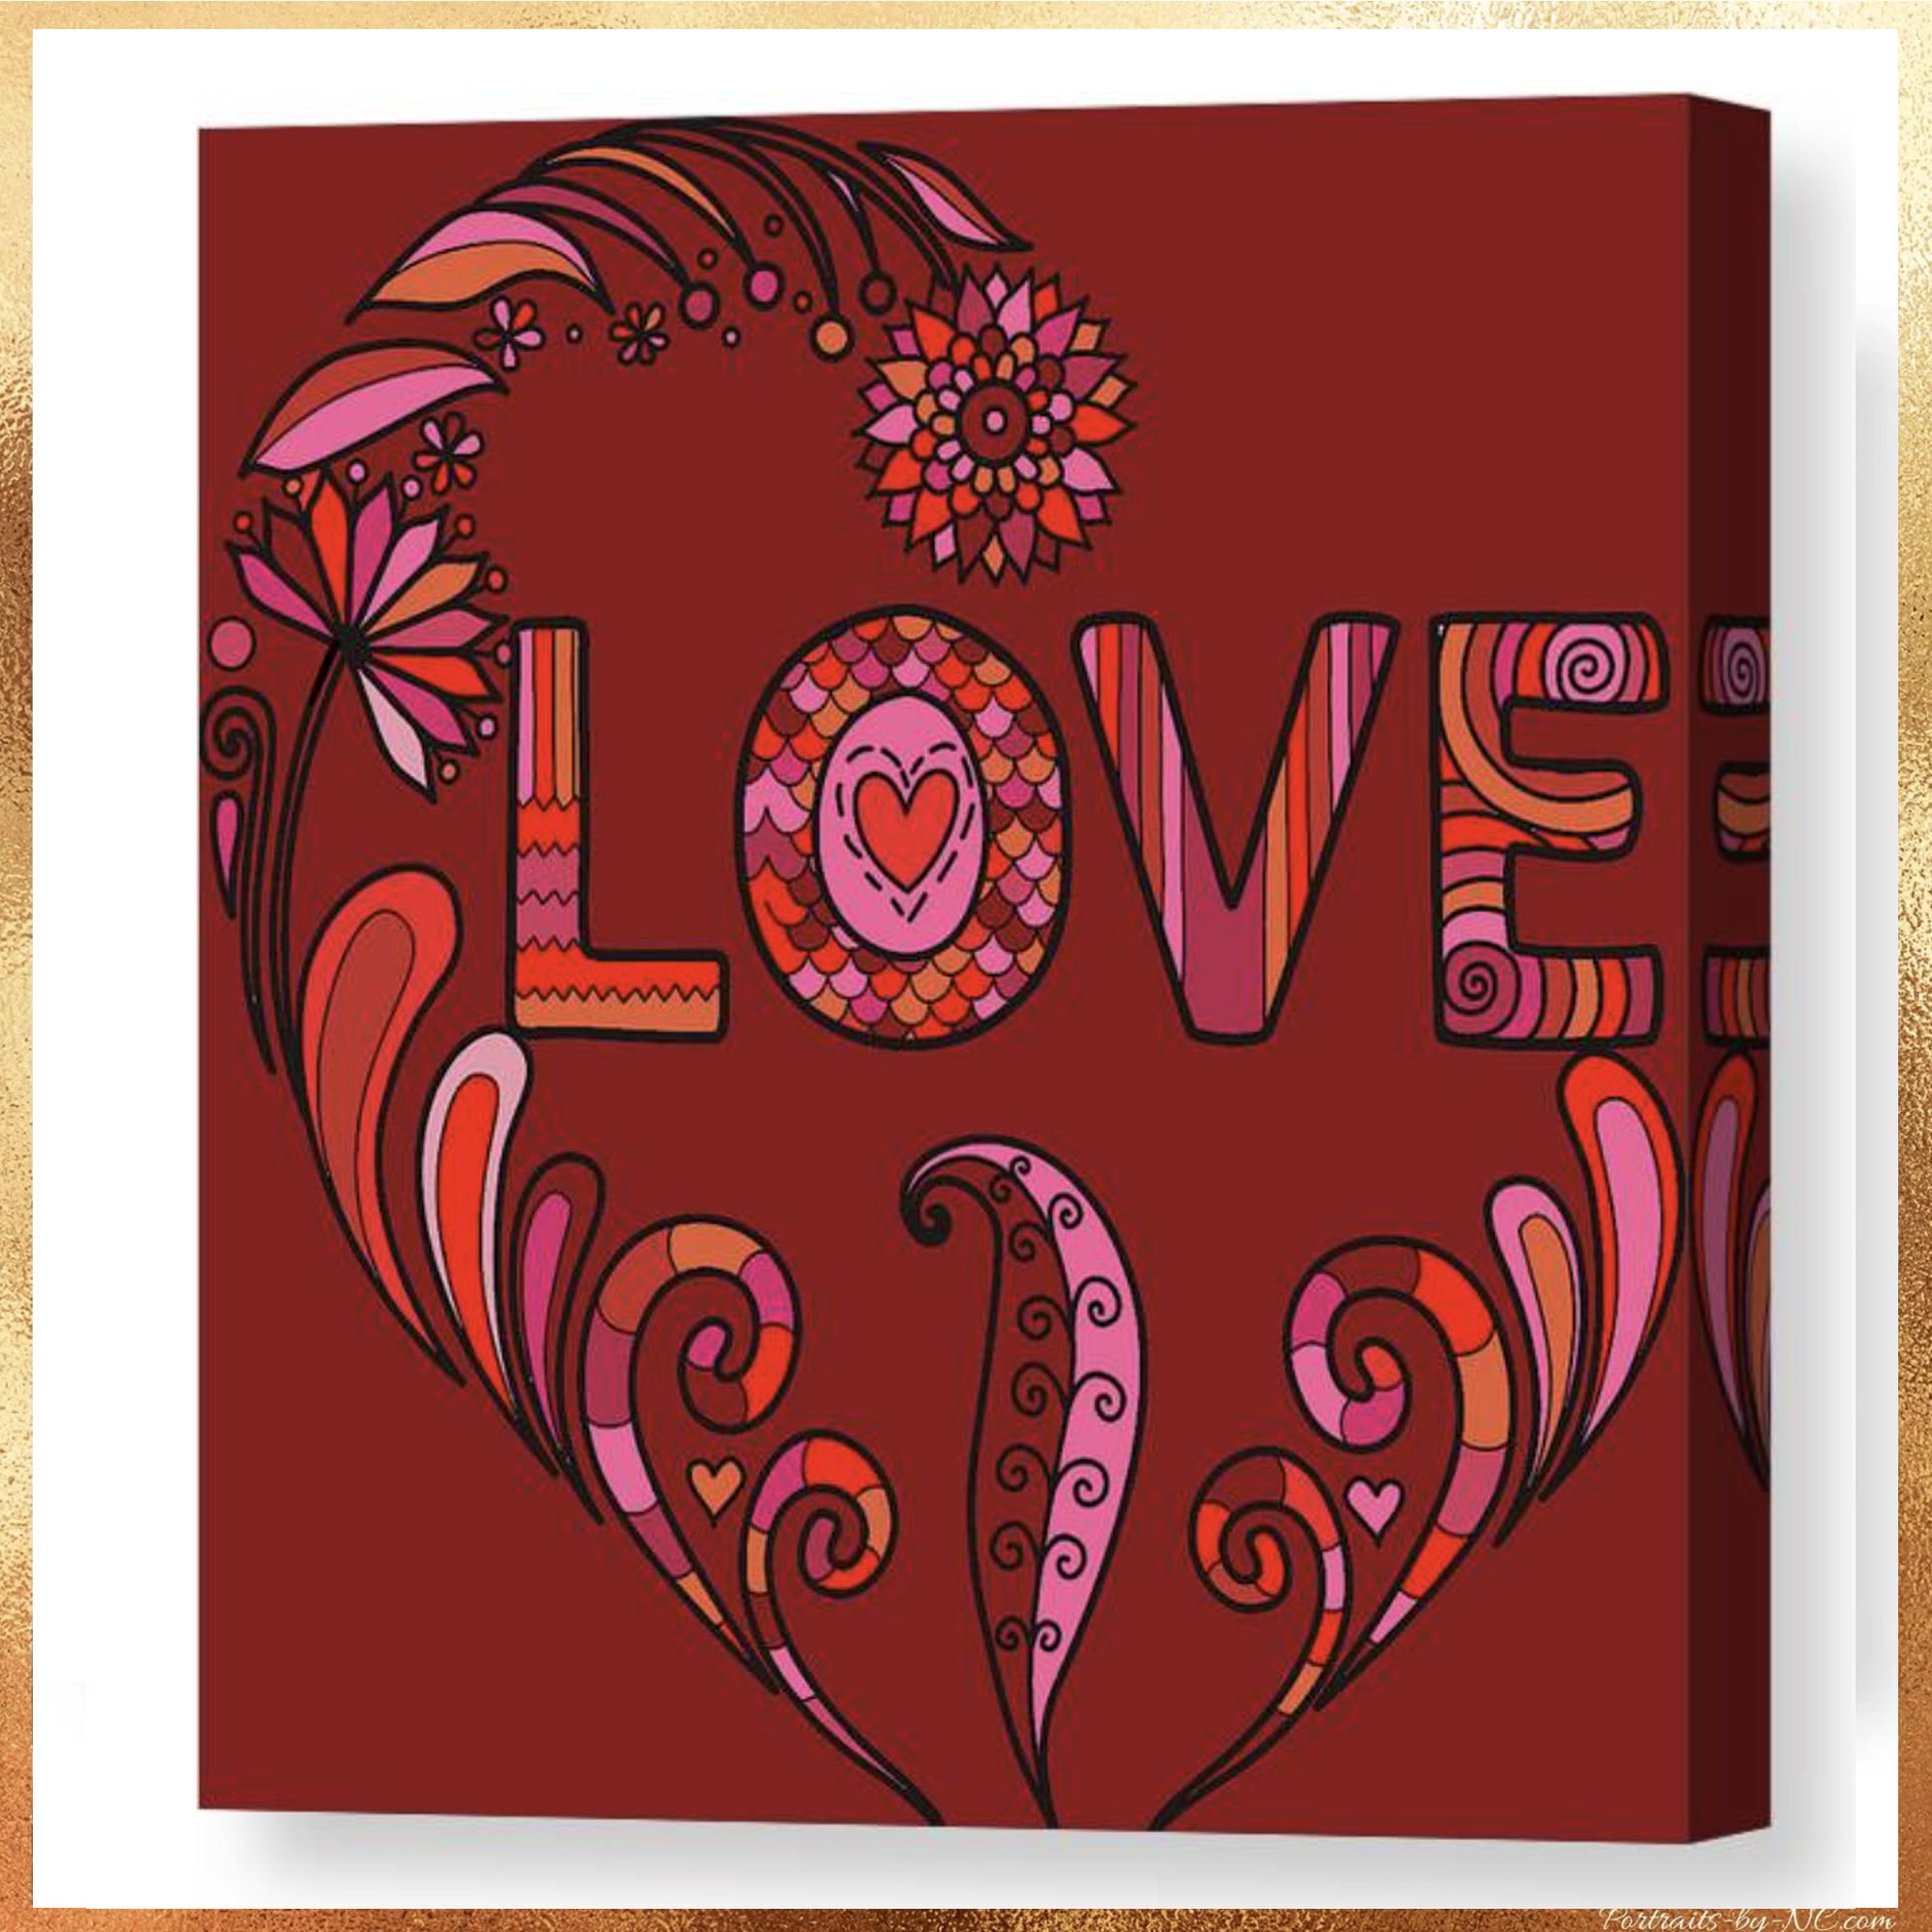 Boho Love - Stretched Canvas Print gallery wrap